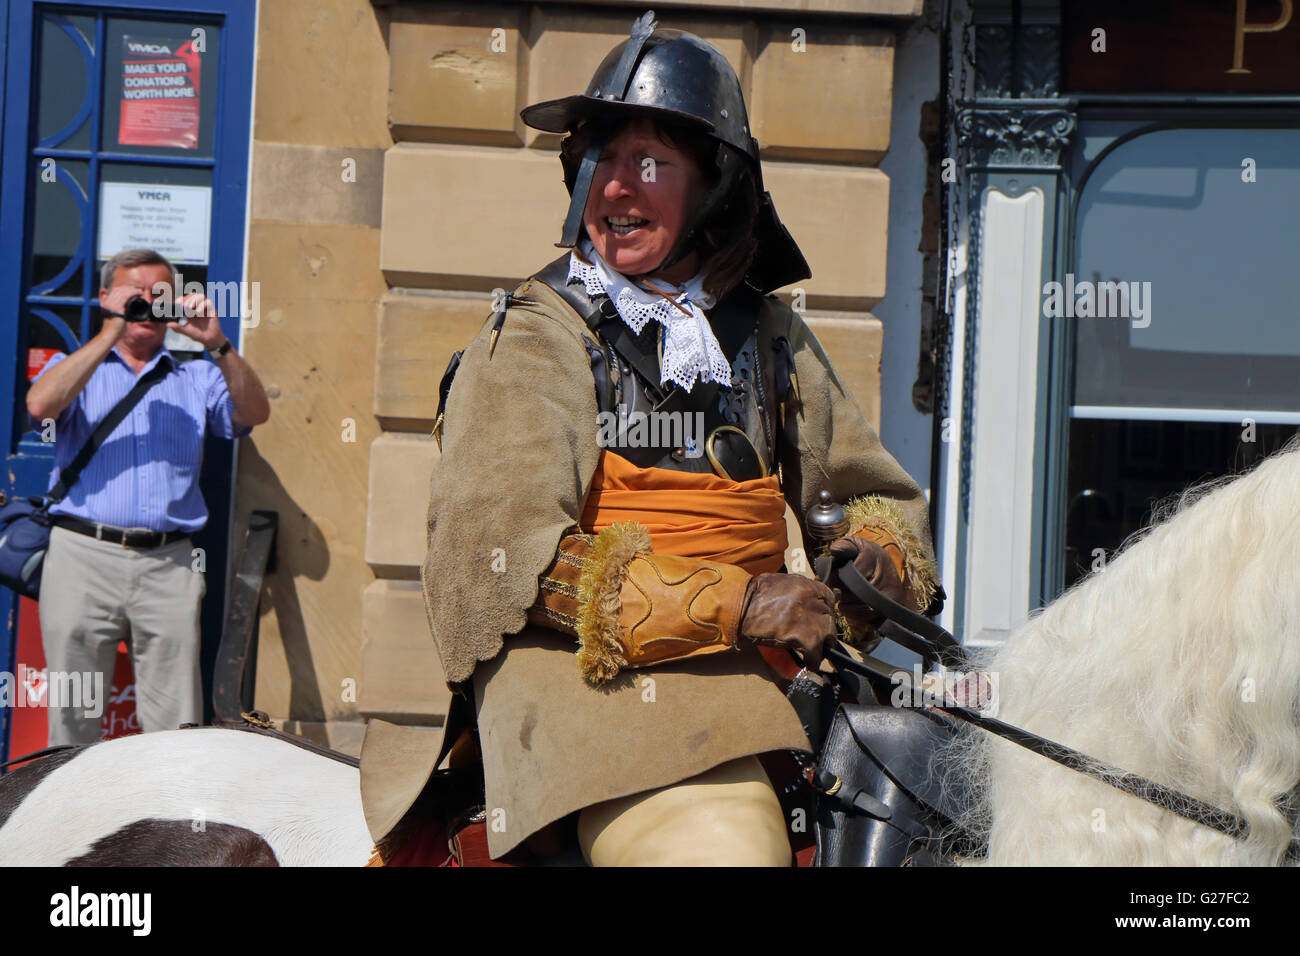 Cavalry soldier on horseback in Newark on Trent Market reenacting the final surrender royalist forces to the parliamentarians Stock Photo